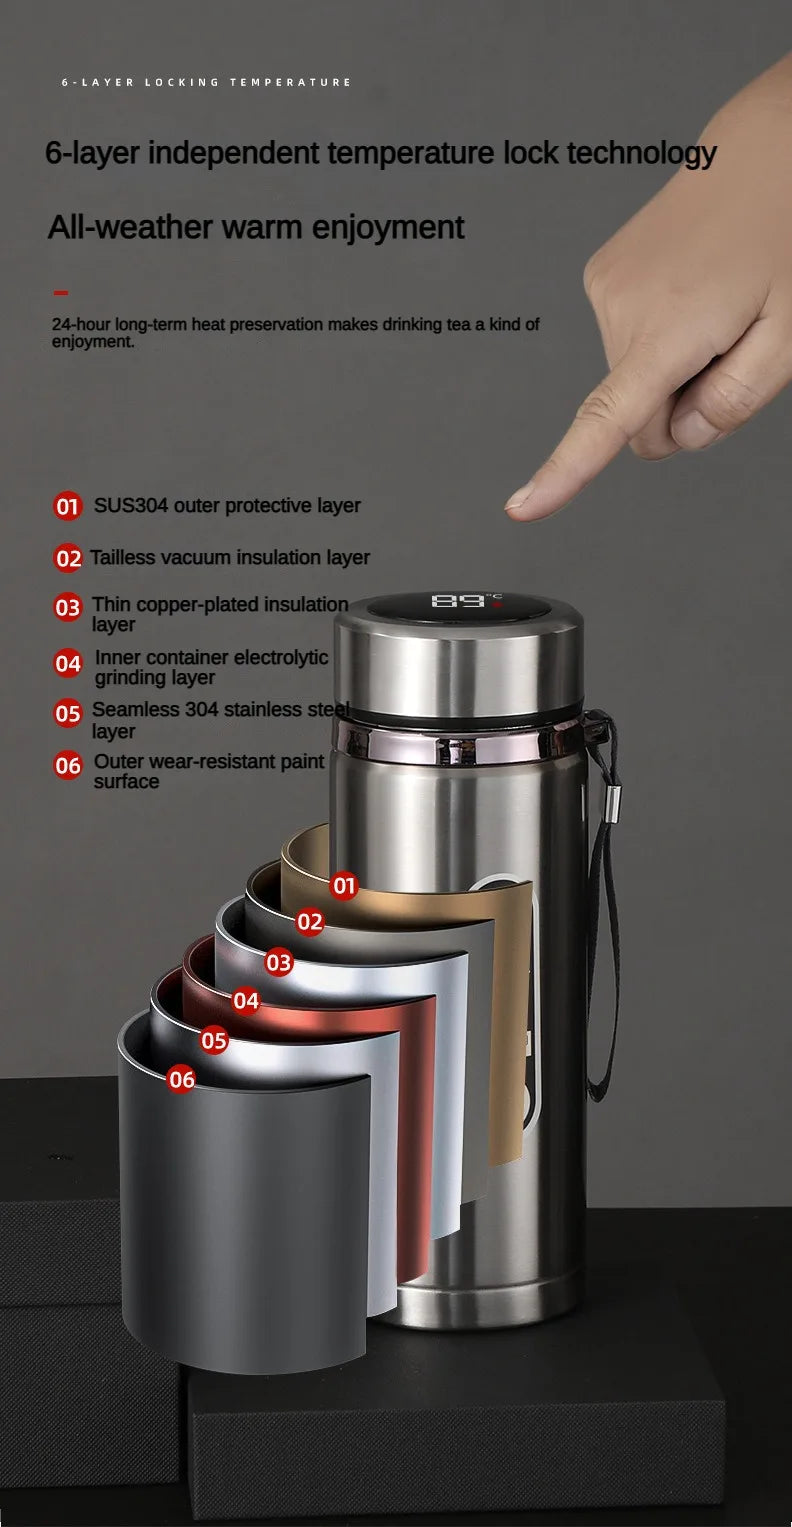 800ML-1 Liter Stainless Steel Thermos Bottle with LED Temperature Display – Vacuum Flask Tea Water Bottle – Insulated & Portable Cups